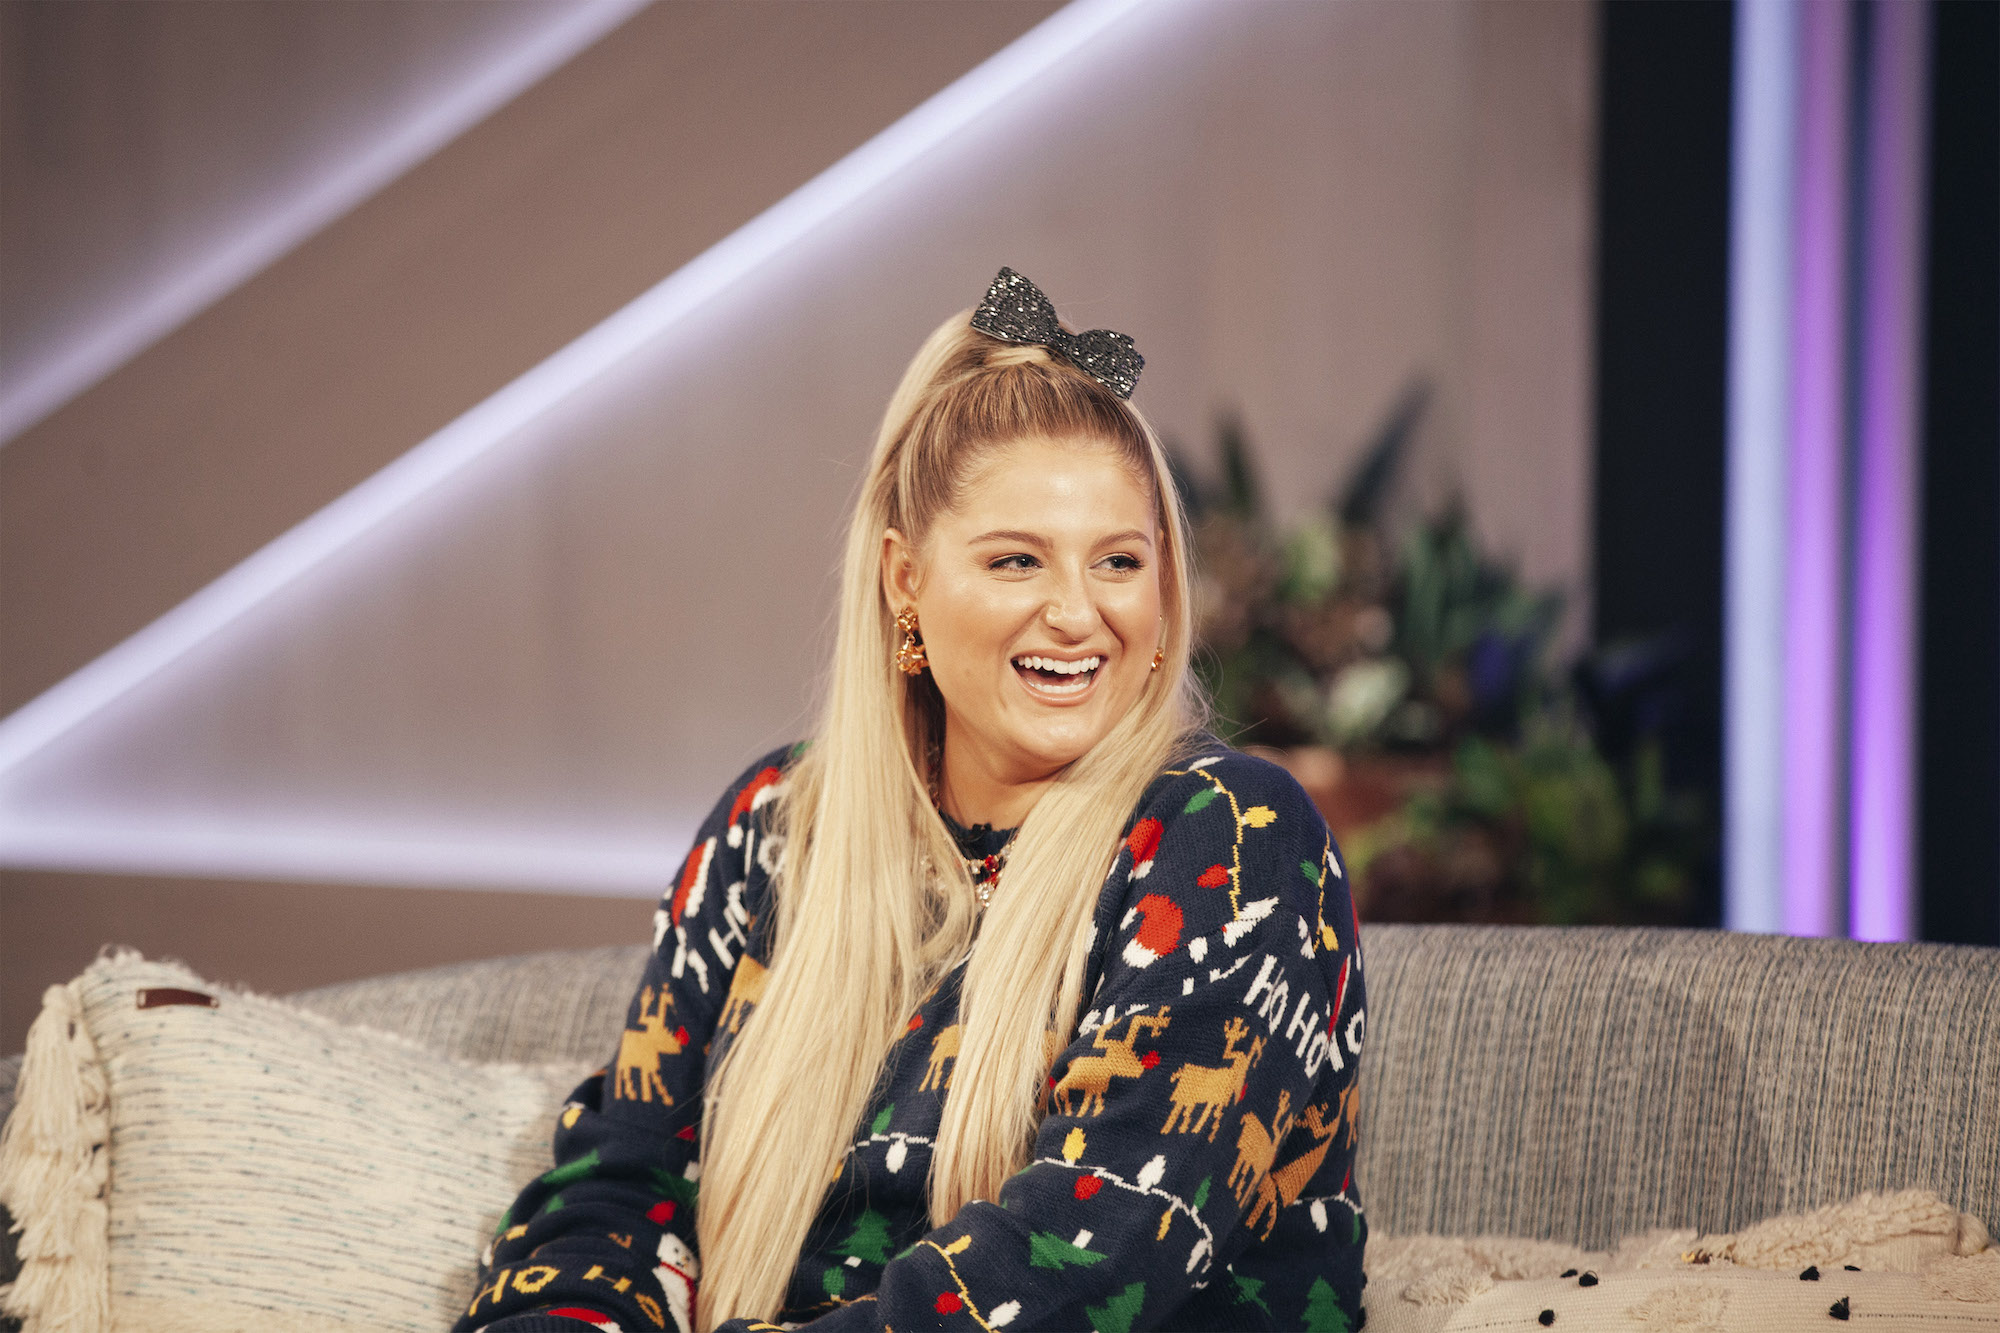 Meghan Trainor, who has written songs for Jennifer Lopez and Tim McGraw, wearing a black Christmas sweater.